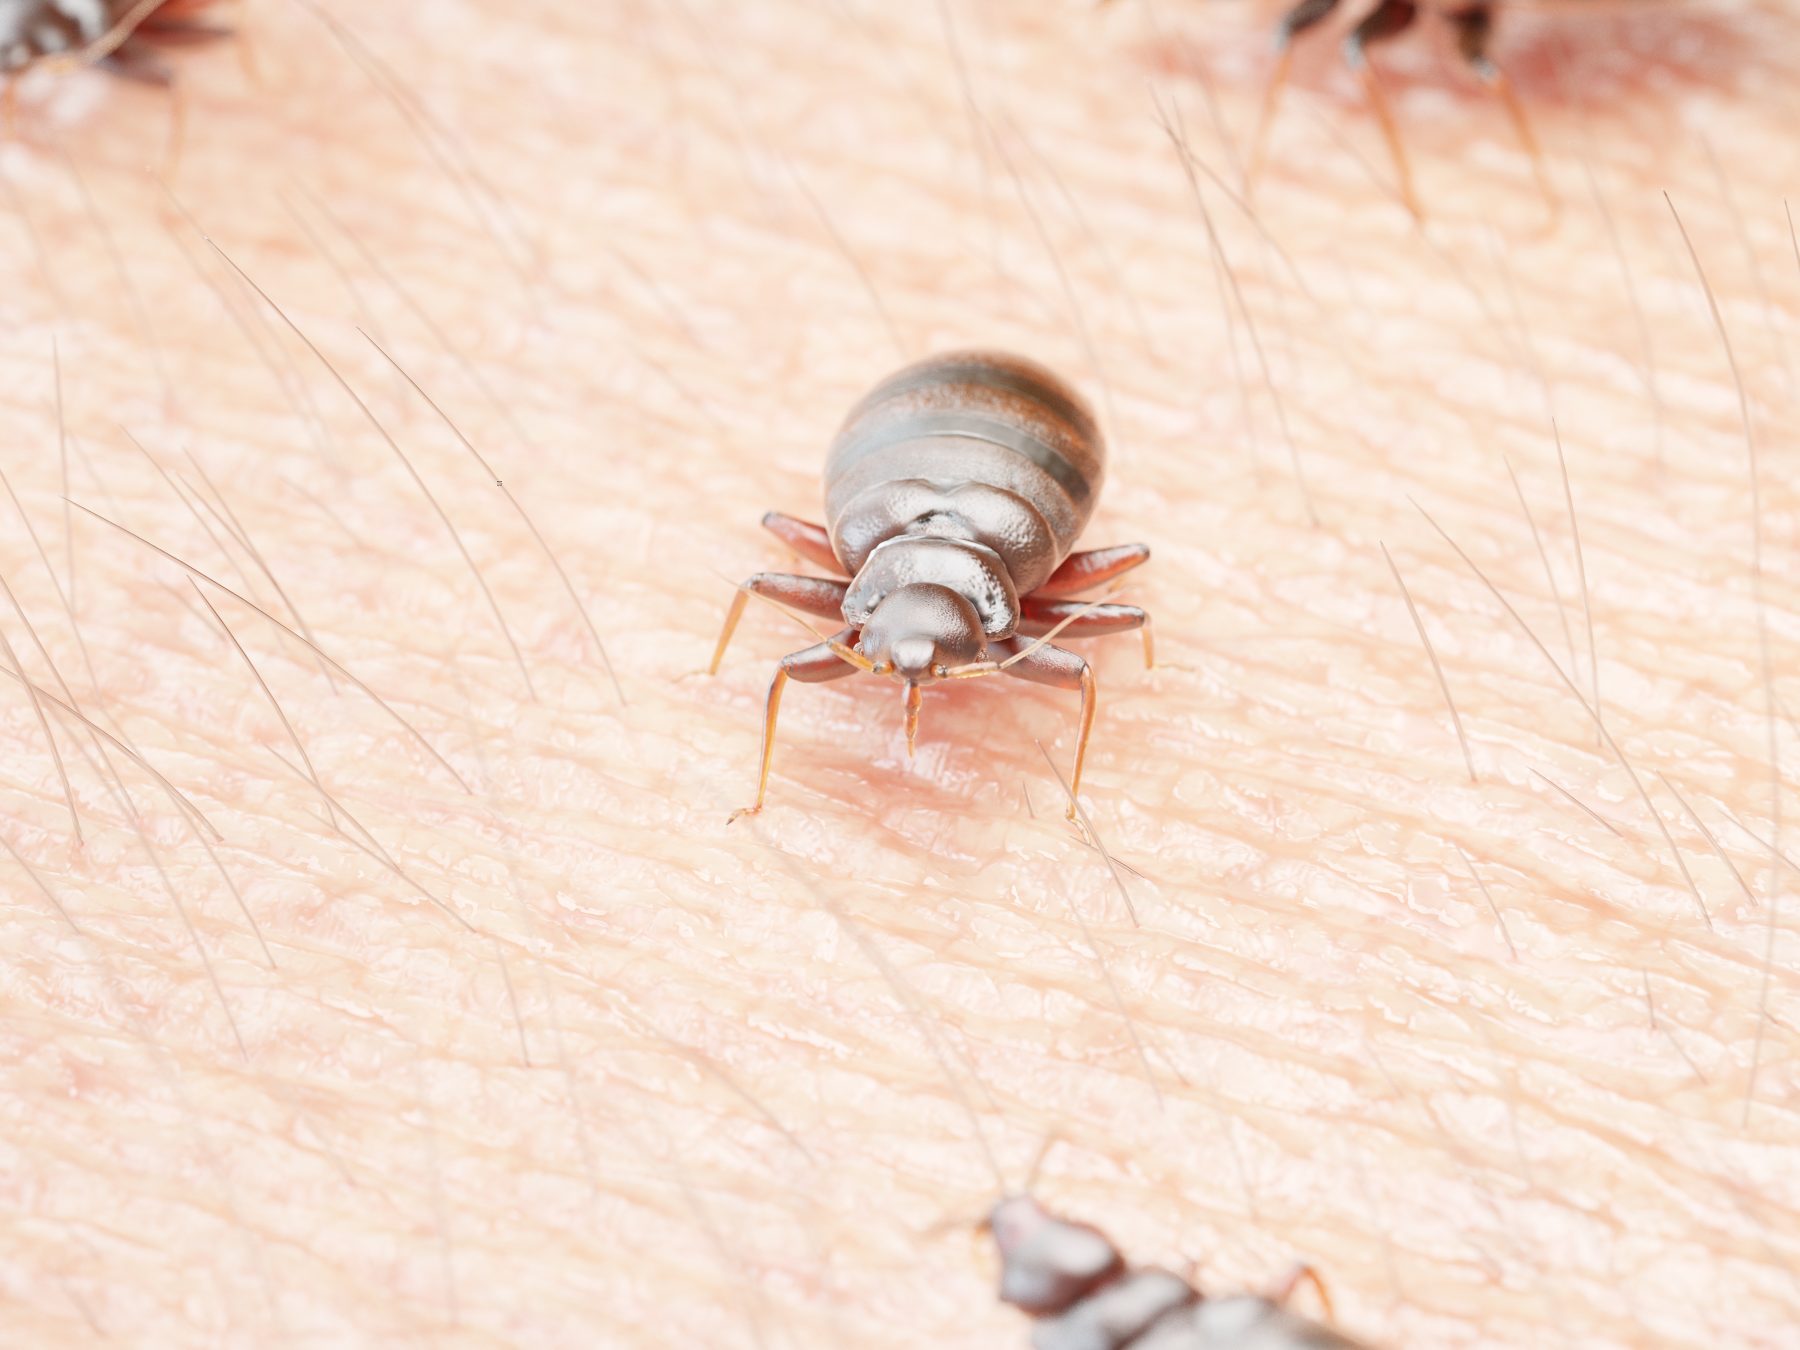 Adult bed bugs on someone's skin